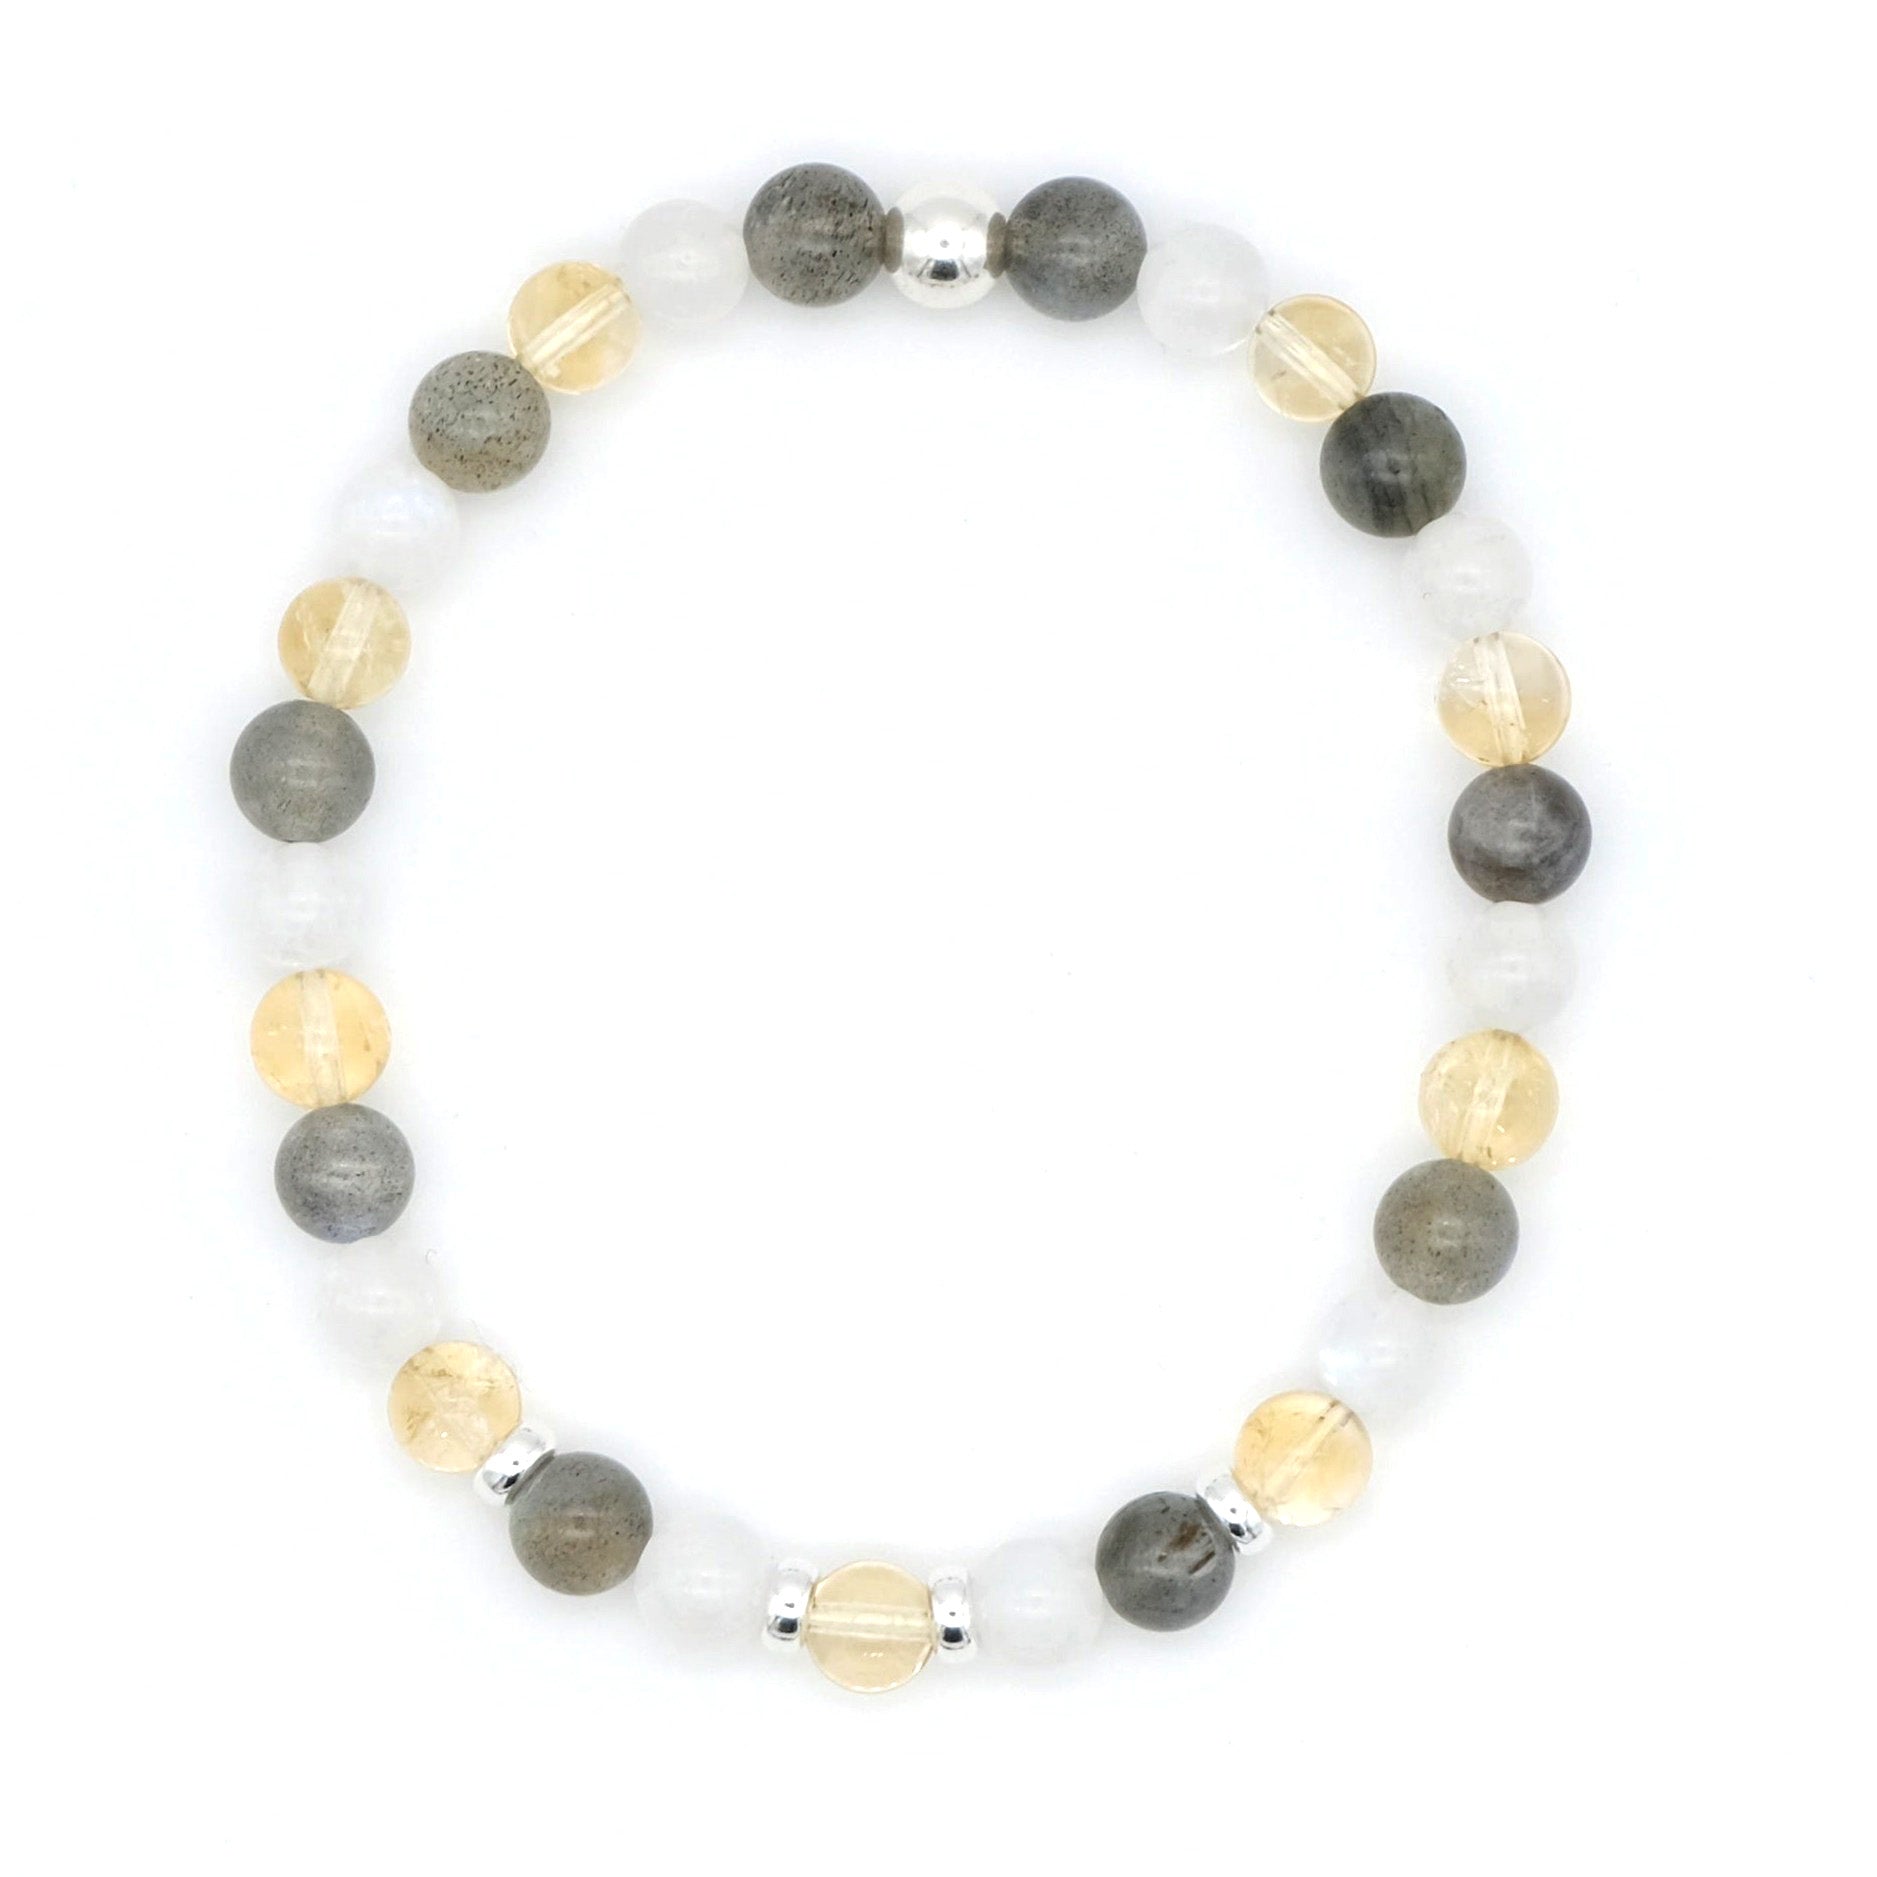 A citrine, labradorite and moonstone gemstone bracelet in 6mm beads with silver accessories from above